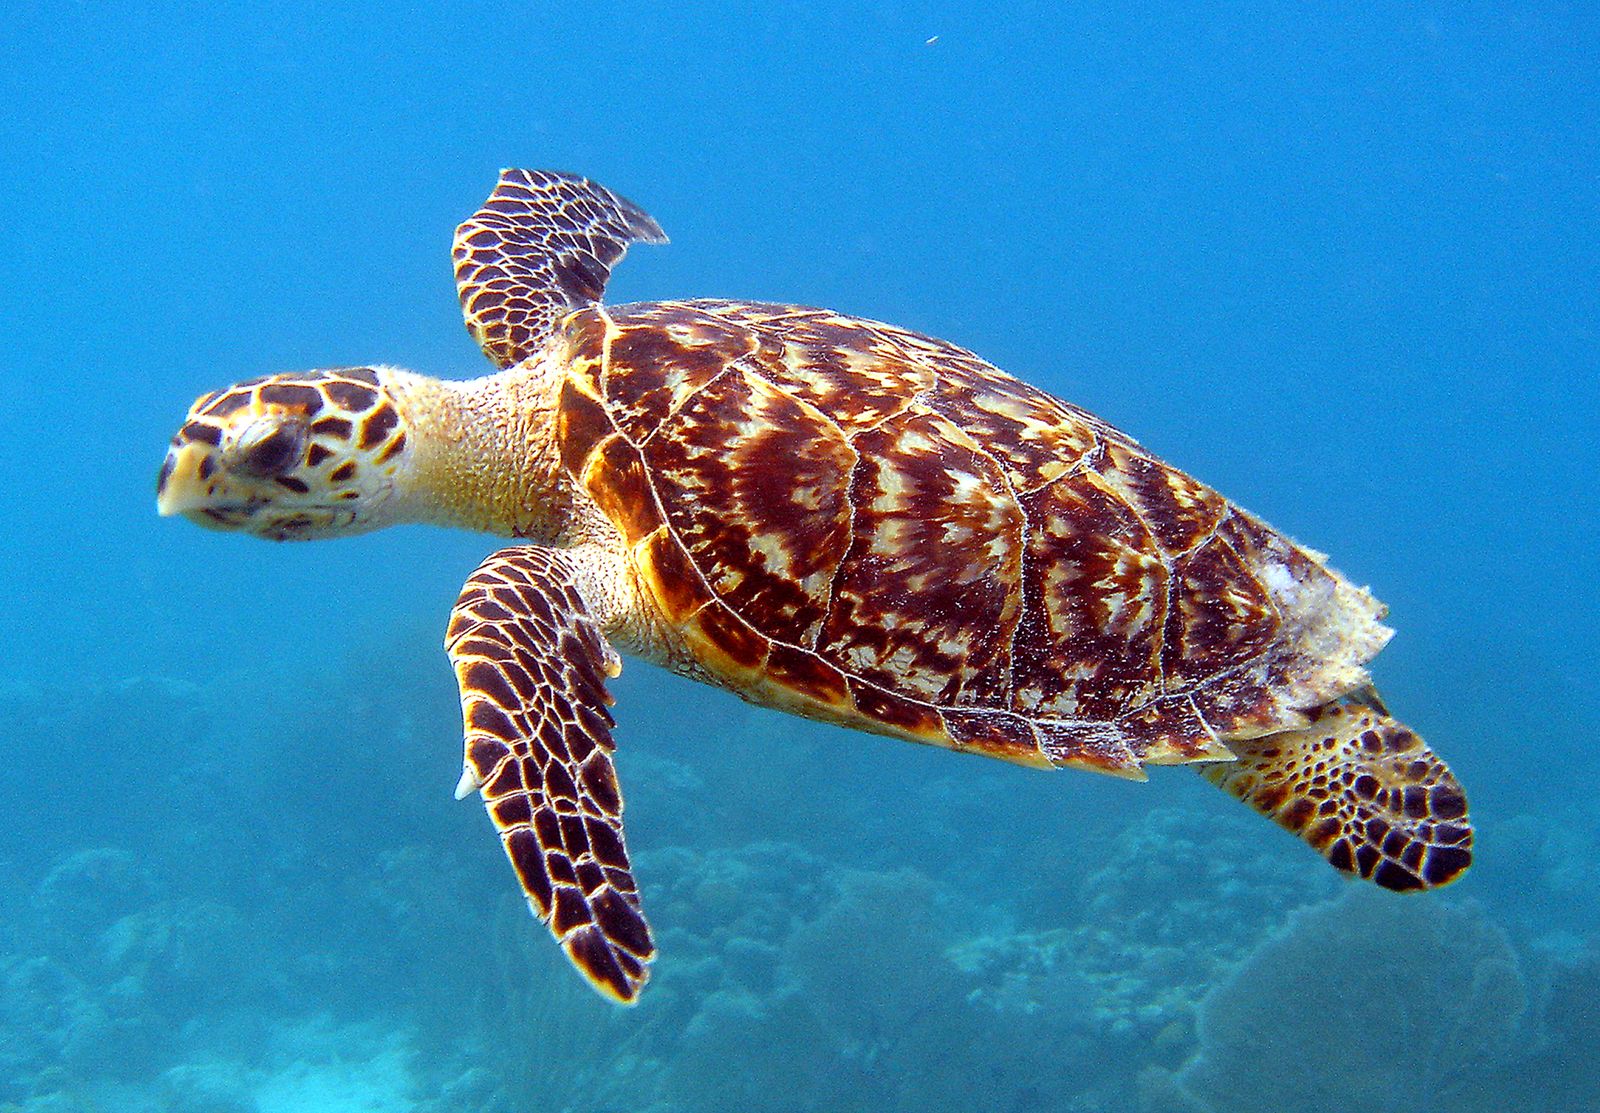 Migrating Sea Turtles Don’t Really Know Where They’re Going